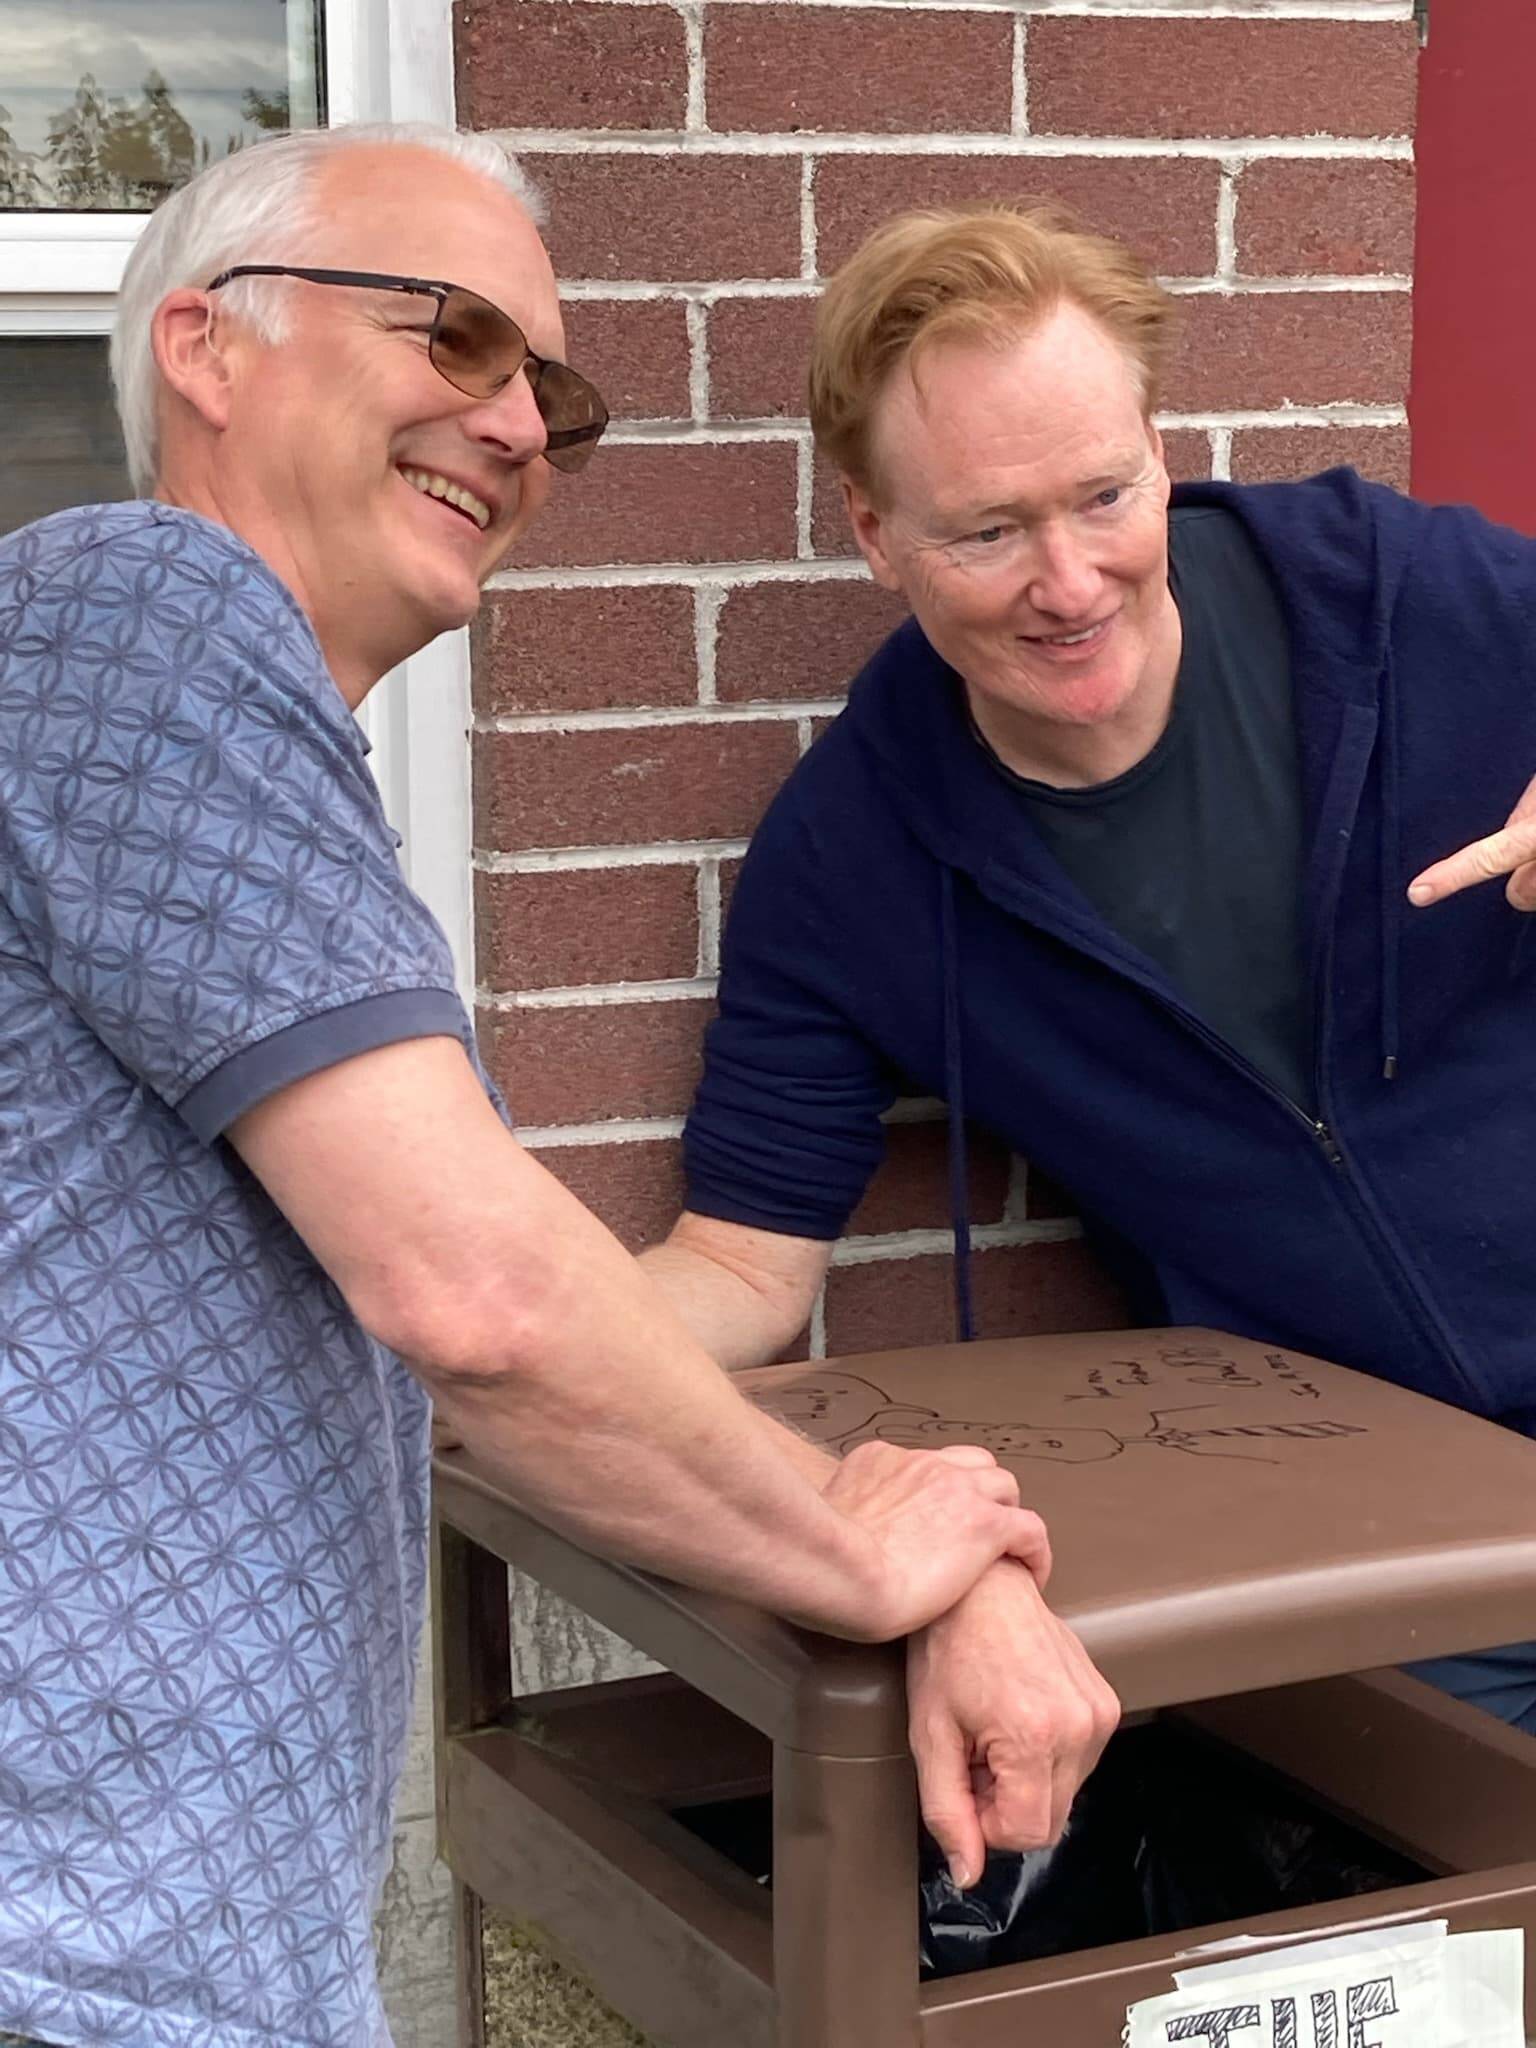 Photo by Craig Cyr
Langley Mayor Scott Chaplin poses with late night TV star Conan O’Brien, who visited the Village by the Sea last Friday for the premiere of his wife’s play at the Whidbey Island Center for the Arts.